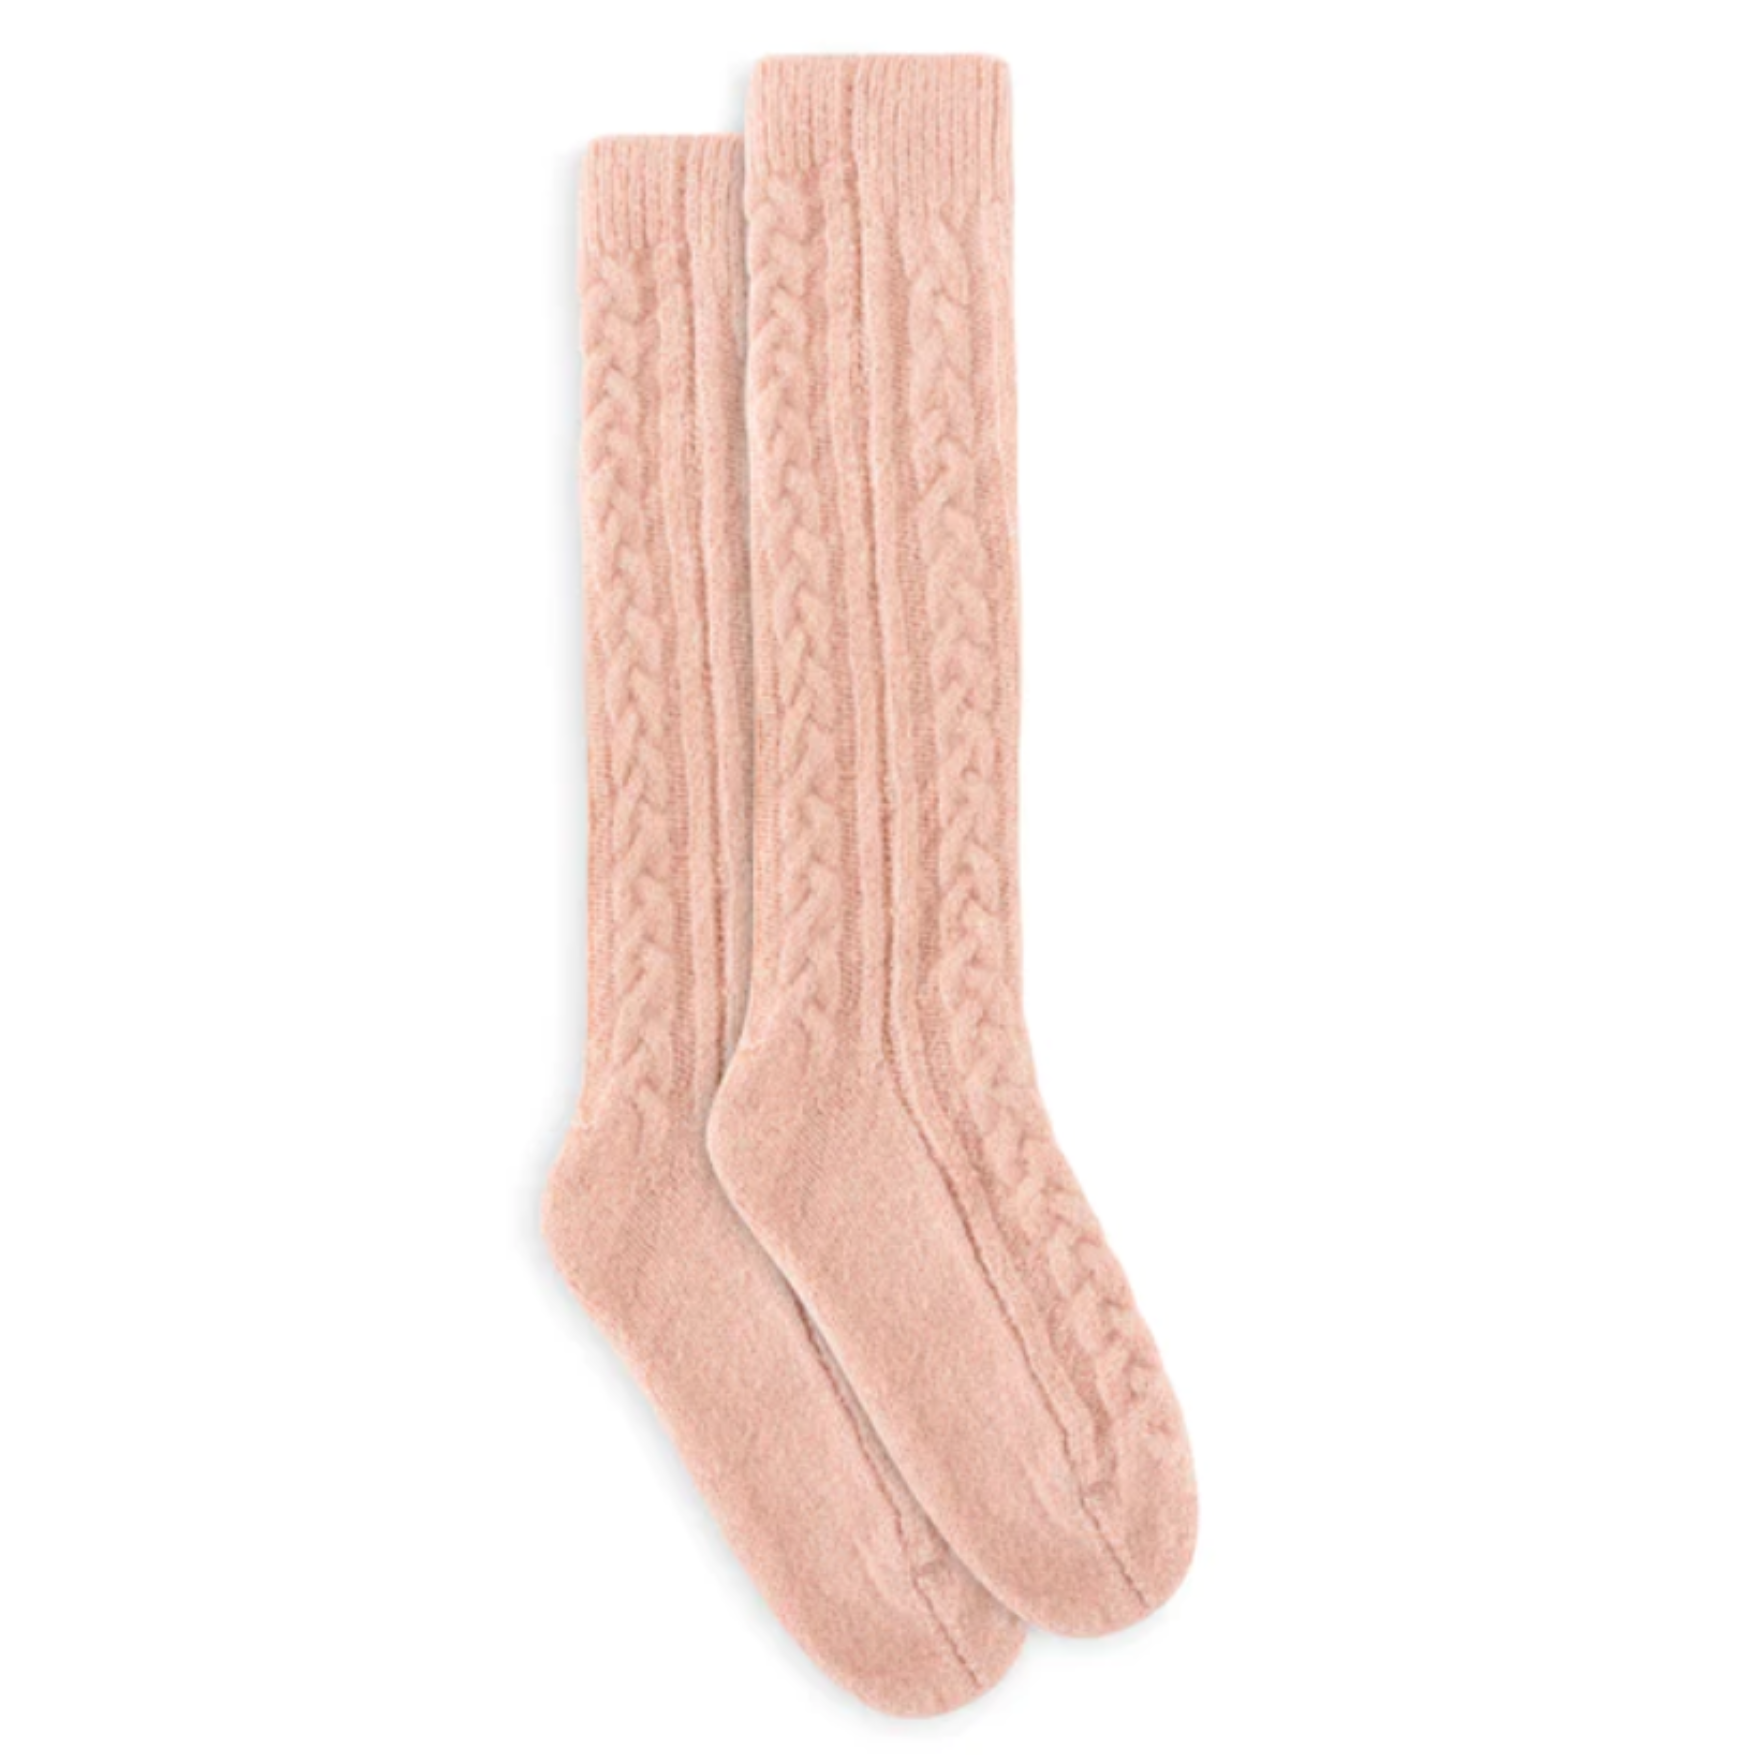 Recycled Yarn Cable Slouch Boot Sock (Women's) - 0